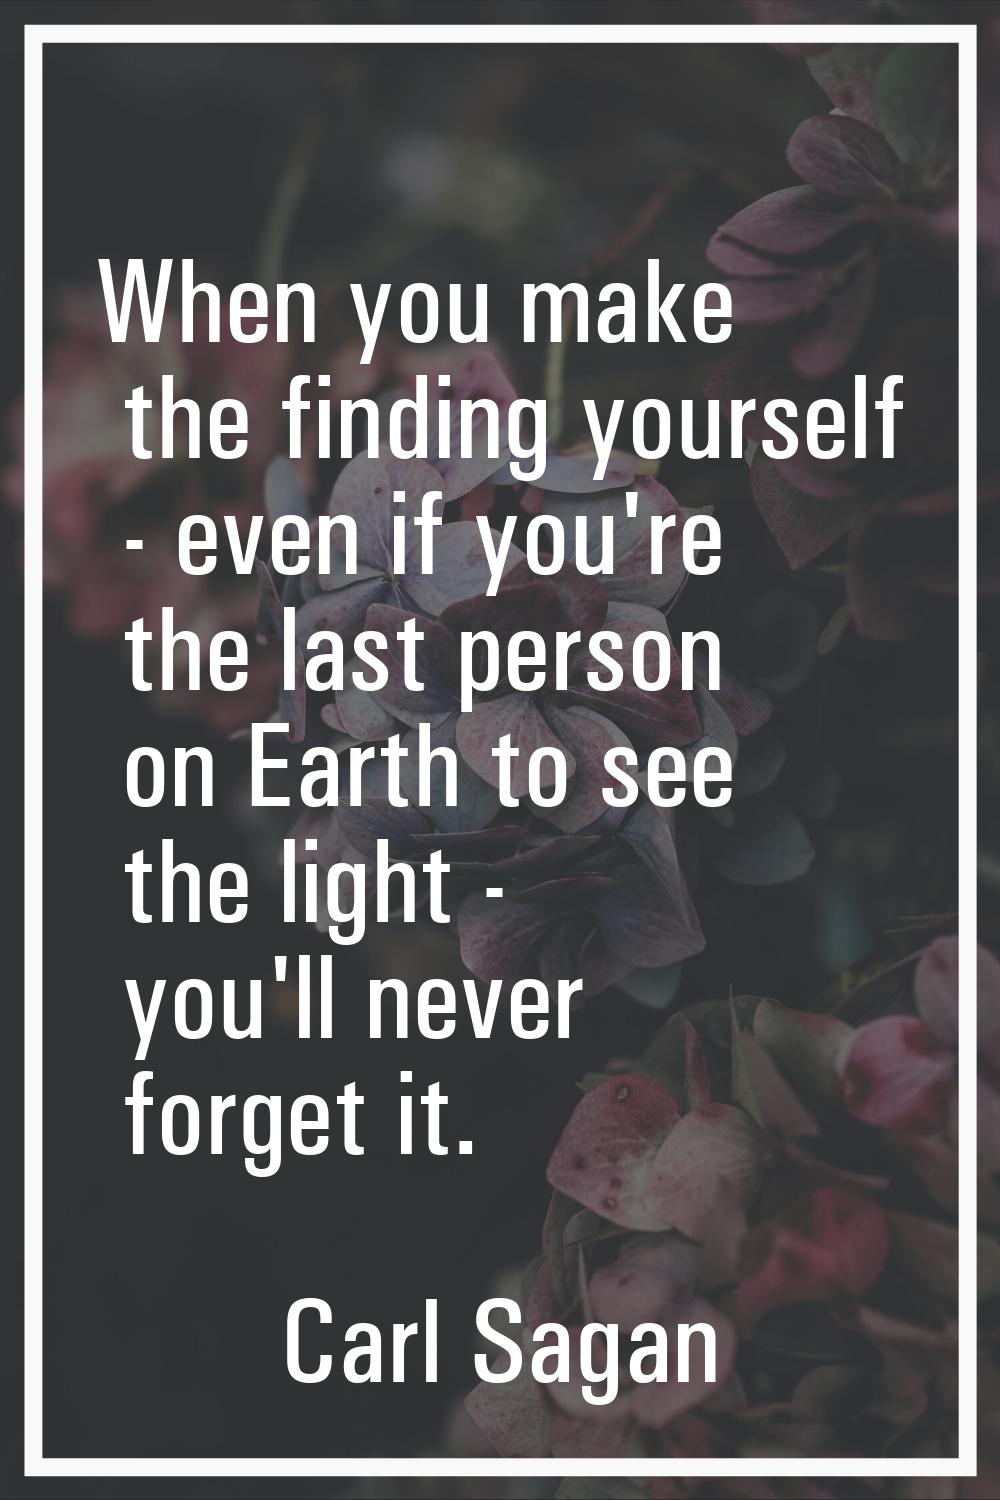 When you make the finding yourself - even if you're the last person on Earth to see the light - you